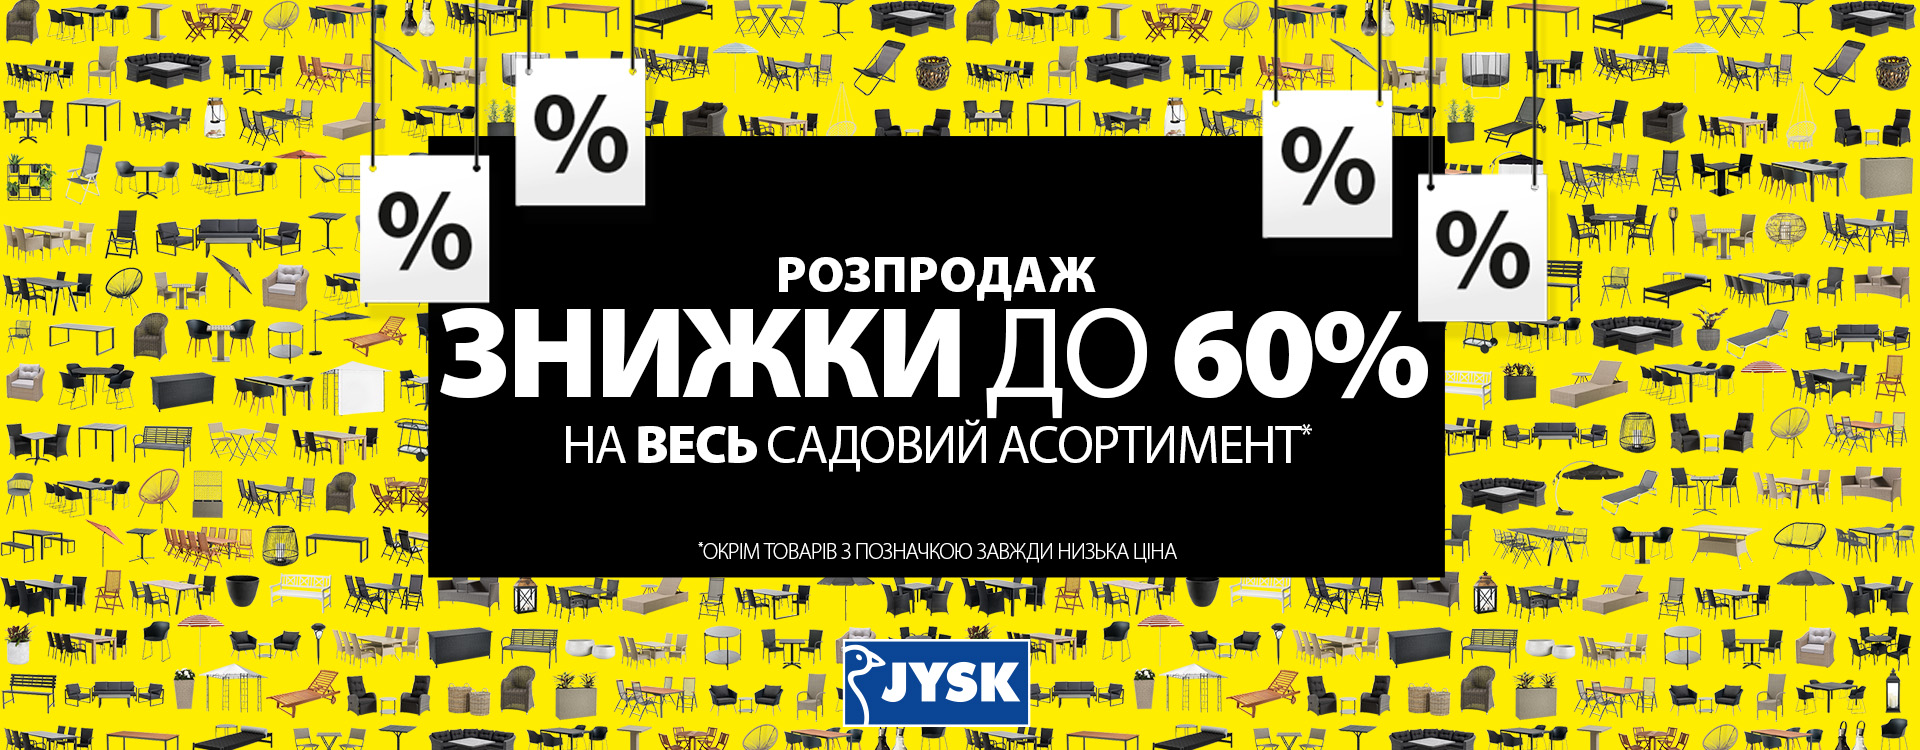 Final SALE at JYSK Discounts up to 60%